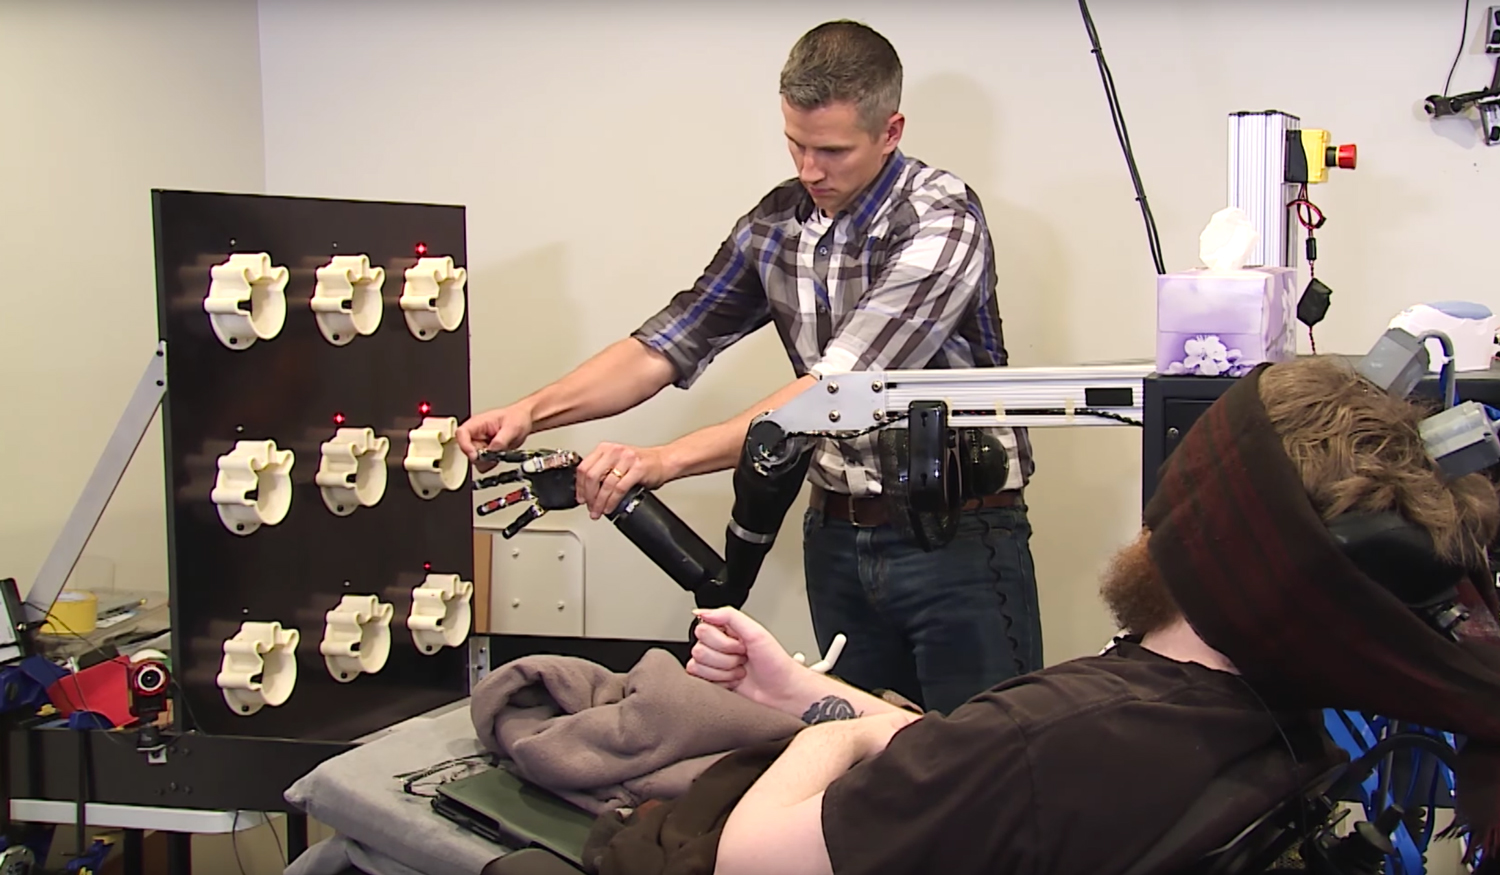 Nathan Copeland, seated, is tested on his sense of touch through a robotic arm.